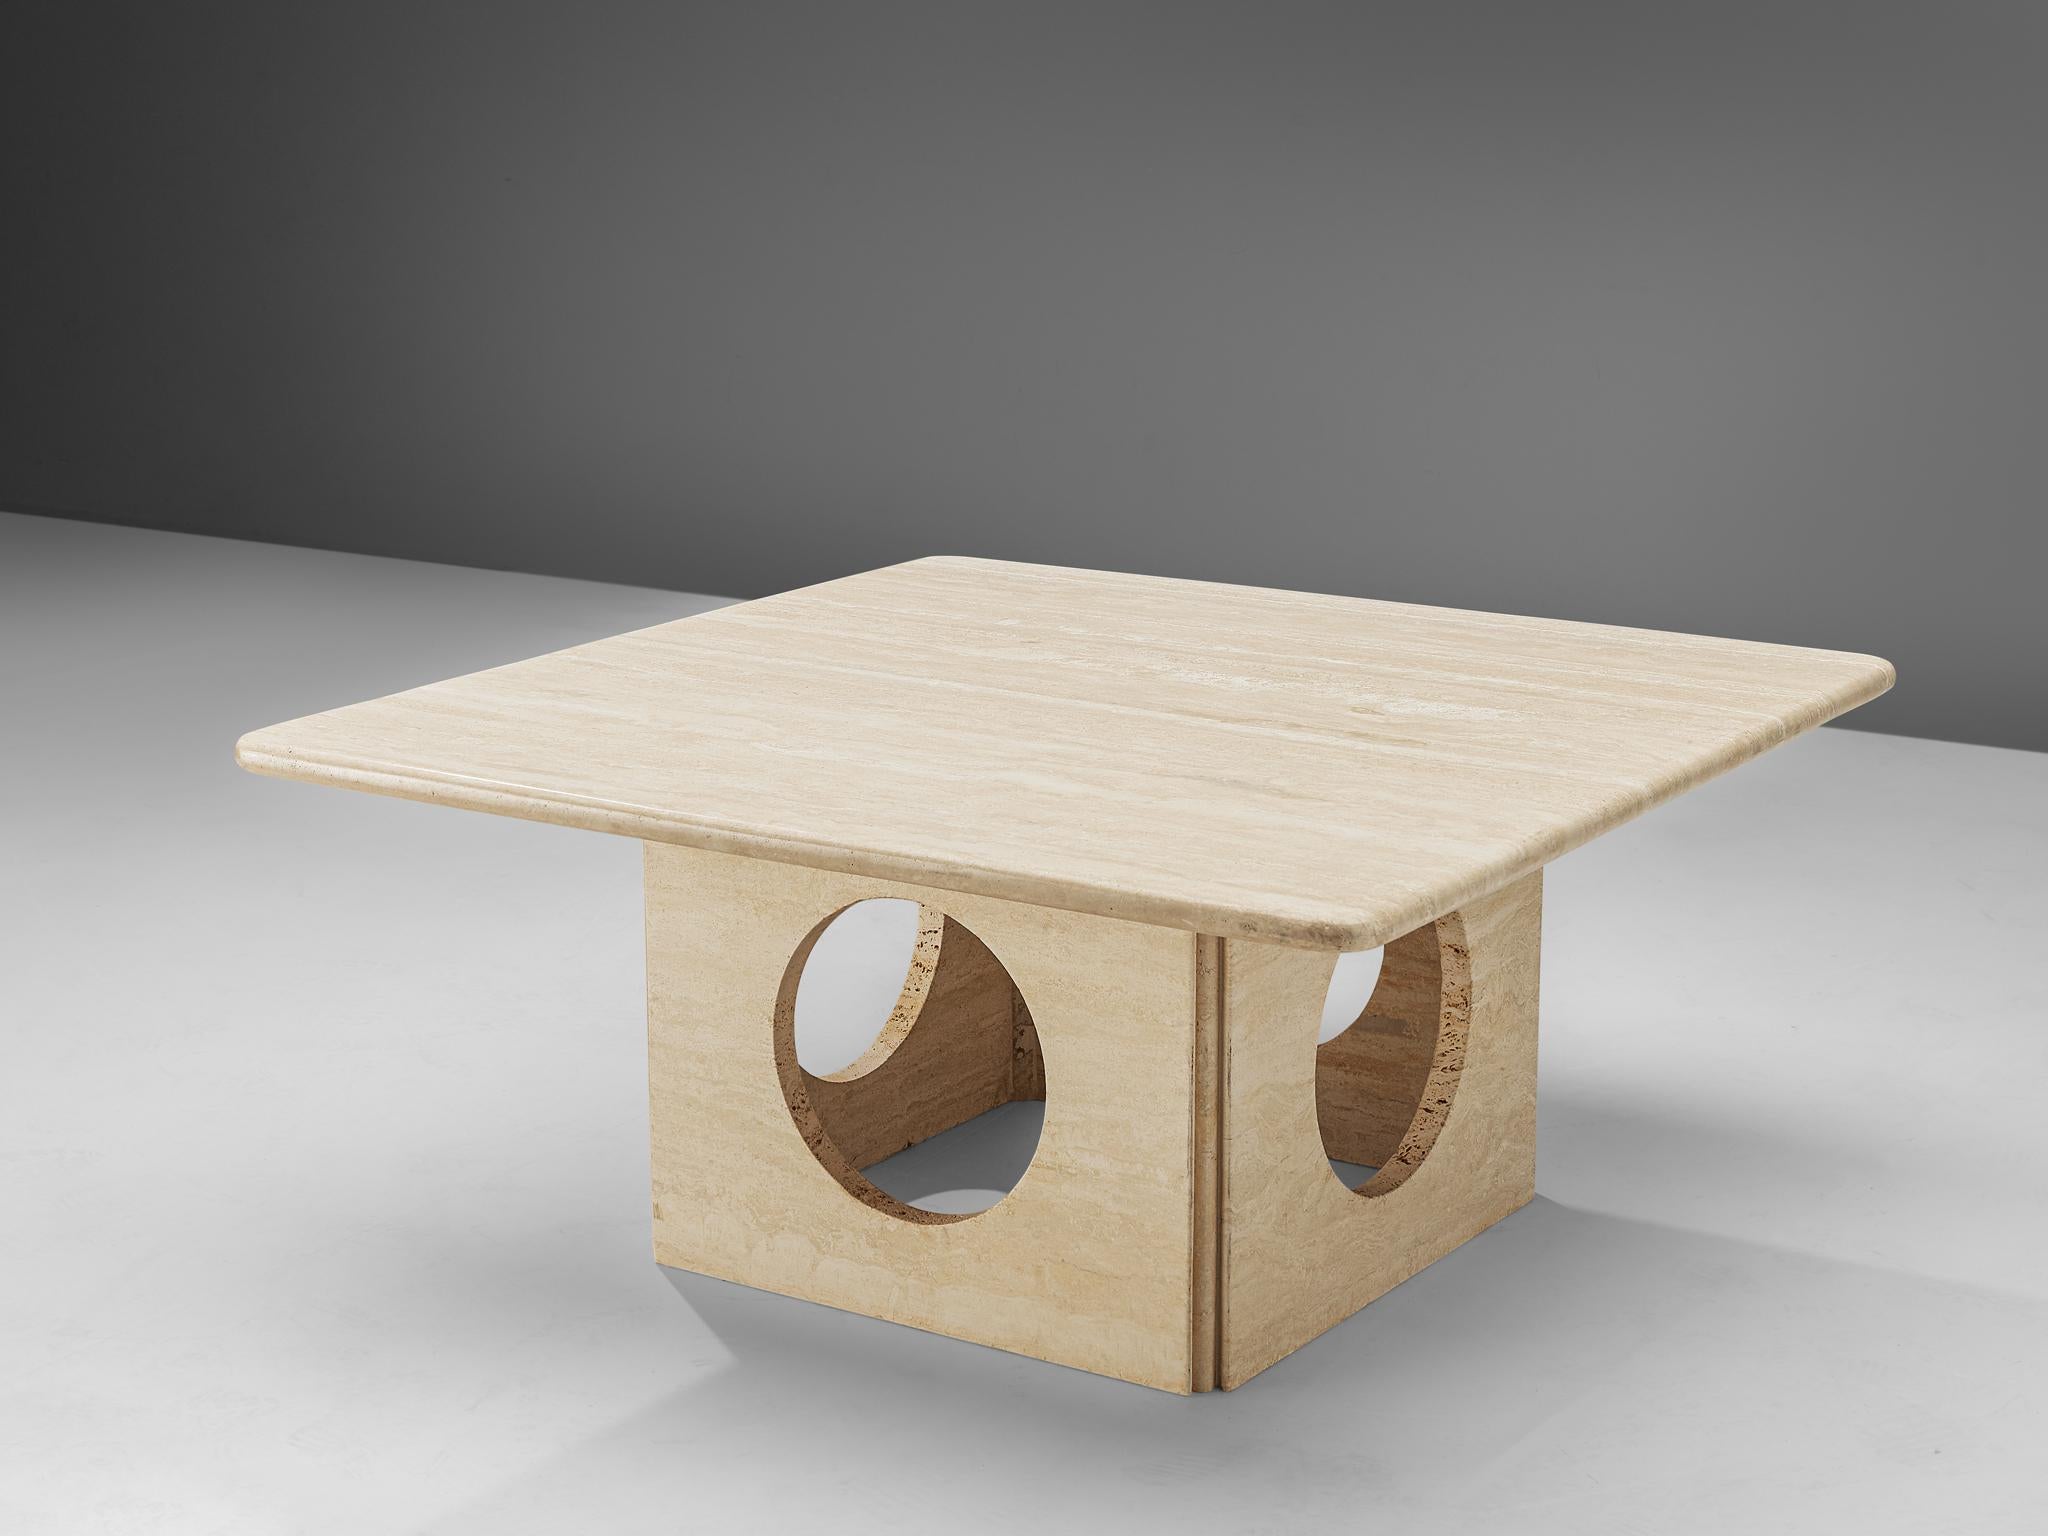 Coffee table, travertine, Italy, 1970s.

This interesting coffee table features a thick squared travertine tabletop with a square base that has four round shaped holes, creating a beautiful play with geometrical lines. These aesthetics are